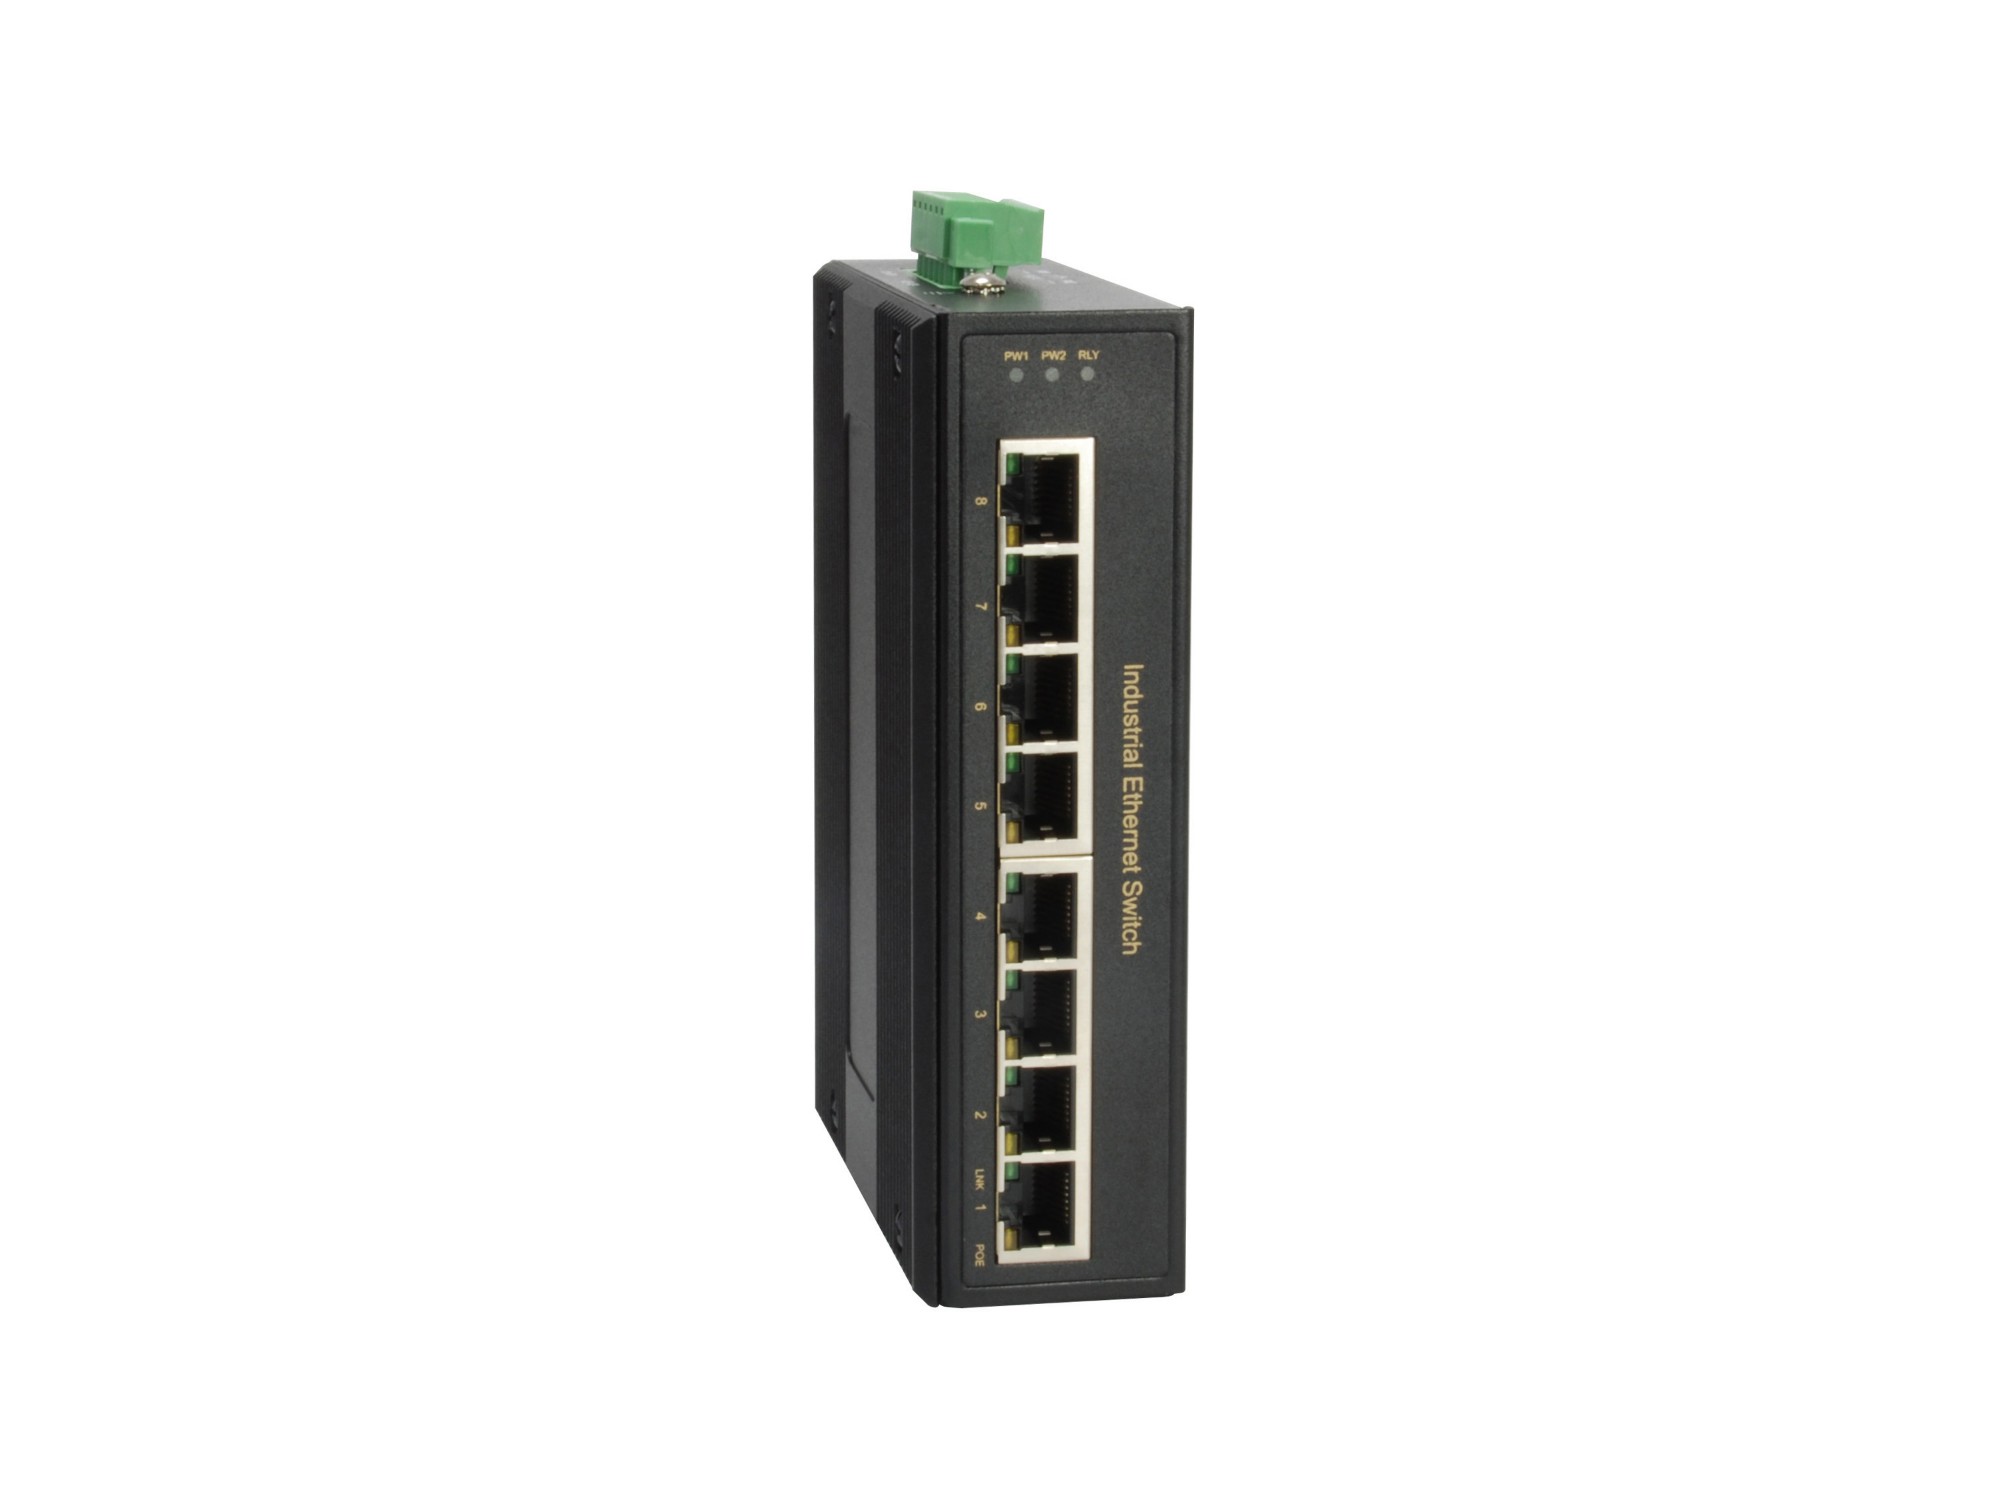 LevelOne 8-Port Gigabit PoE Industrial Switch, 4 PoE Outputs, 802.3at/af PoE, 126W, -40°C to 75°C